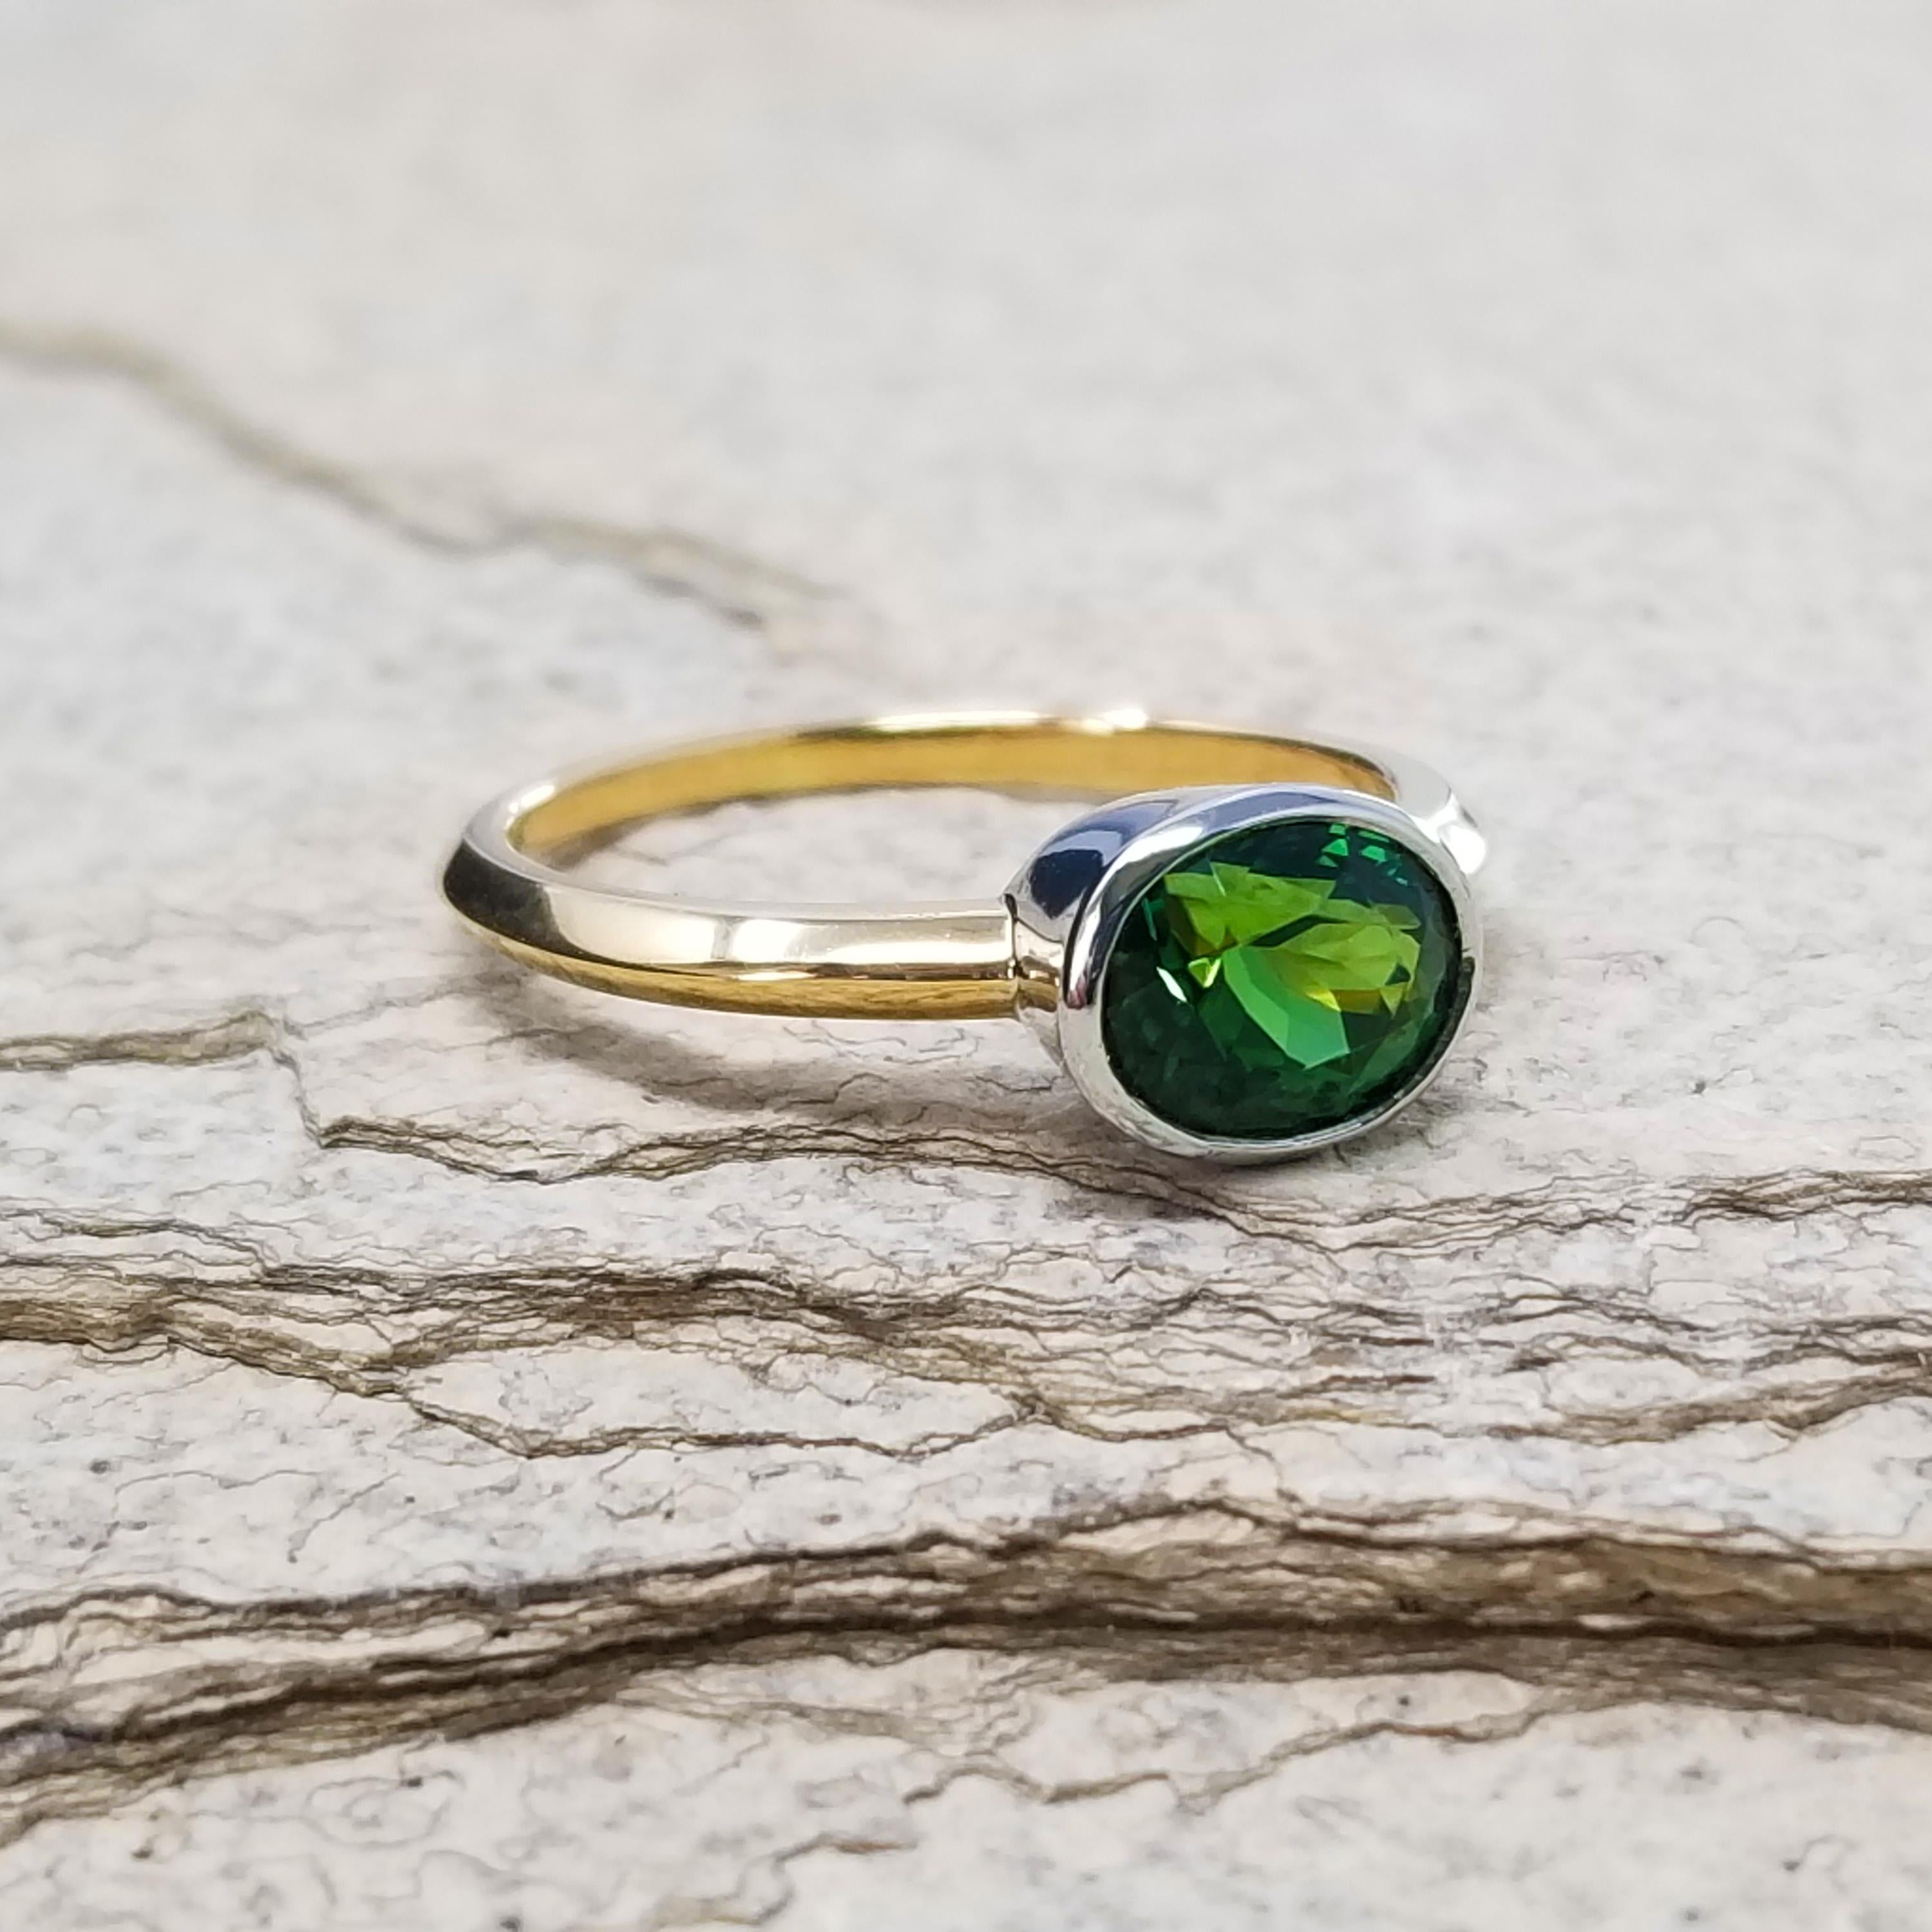 The verdant green of this richly colored chrome tourmaline is absolutely eye-popping. The vibrance of this well-cut gemstone is elegantly displayed in this ring.

